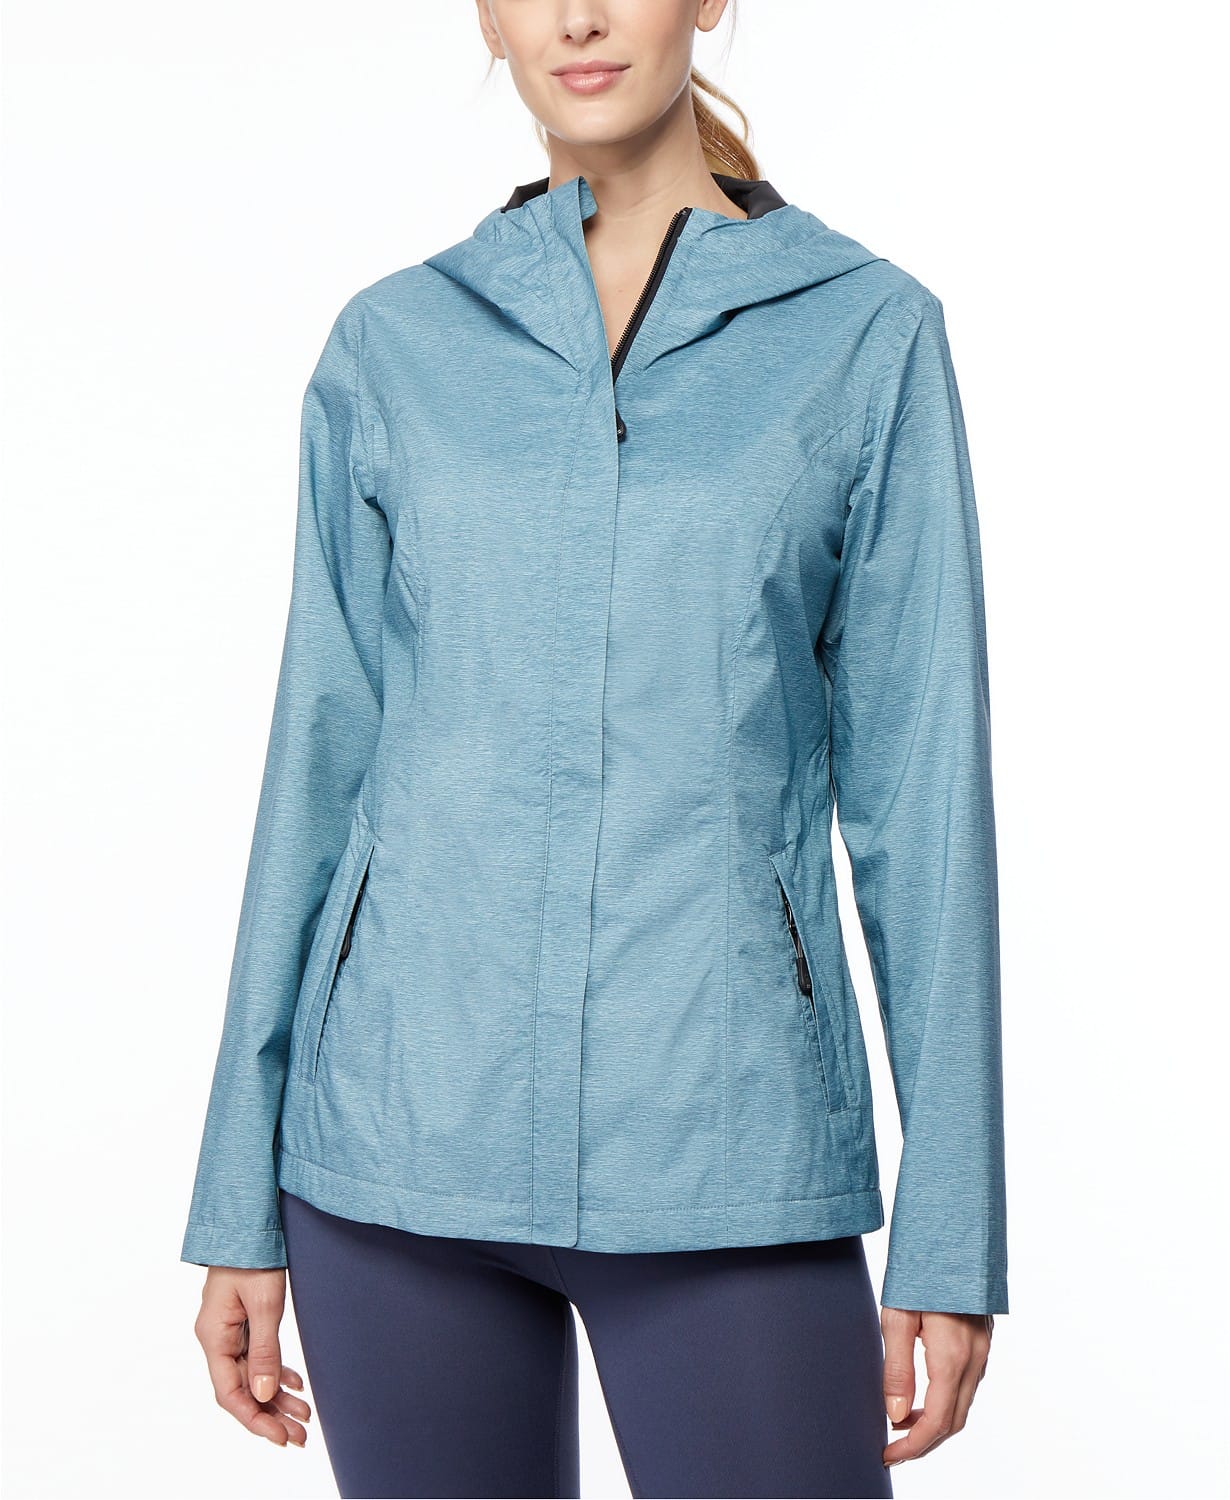 woocommerce-673321-2209615.cloudwaysapps.com-32-degrees-womens-blue-hooded-water-resistant-raincoat